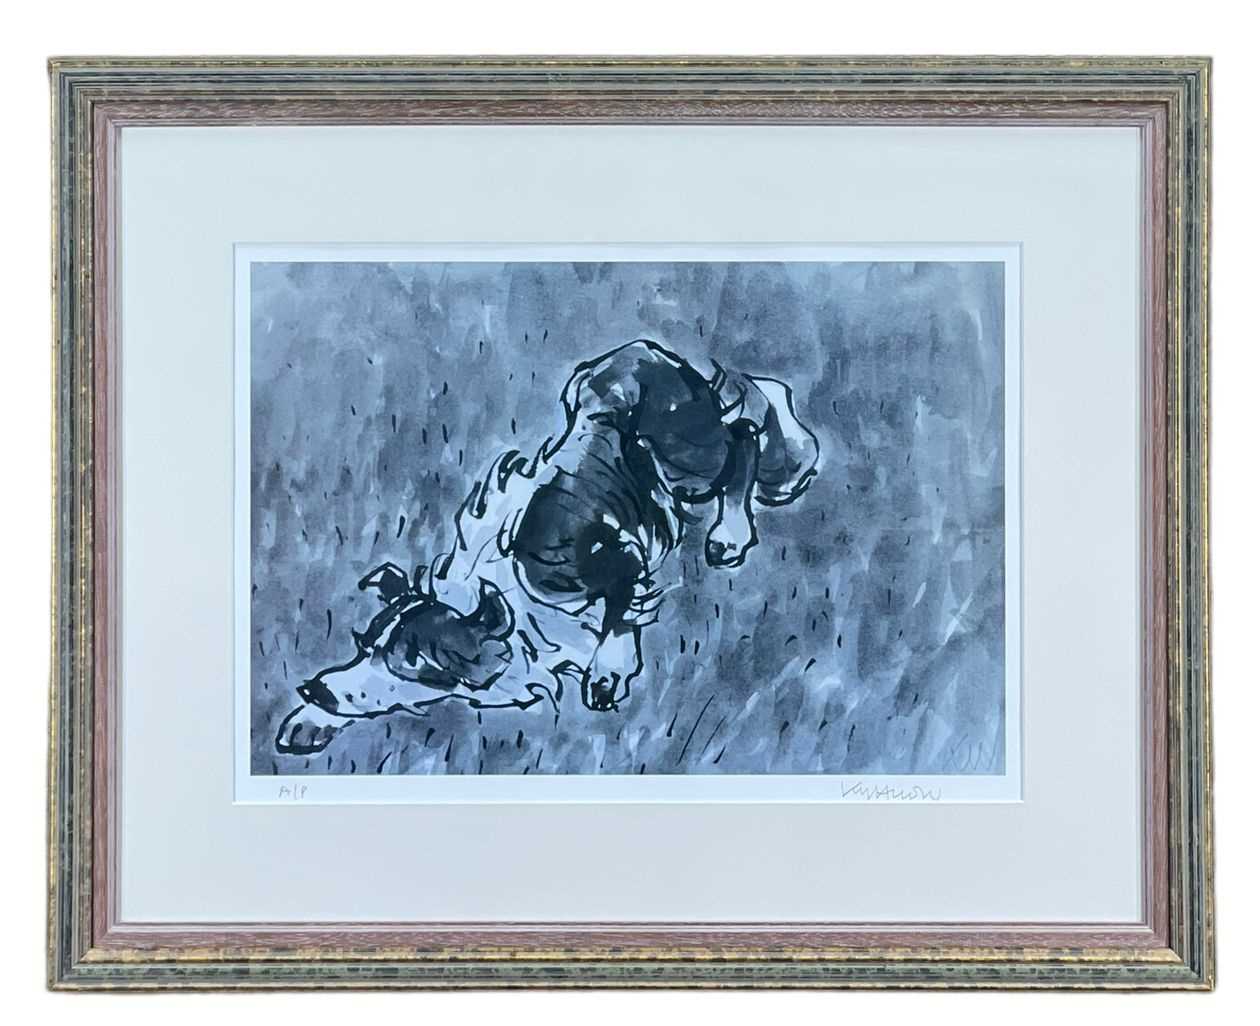 ‡ SIR KYFFIN WILLIAMS RA artist's proof print - study of a pausing sheepdog, fully signed, 51 x - Image 2 of 2